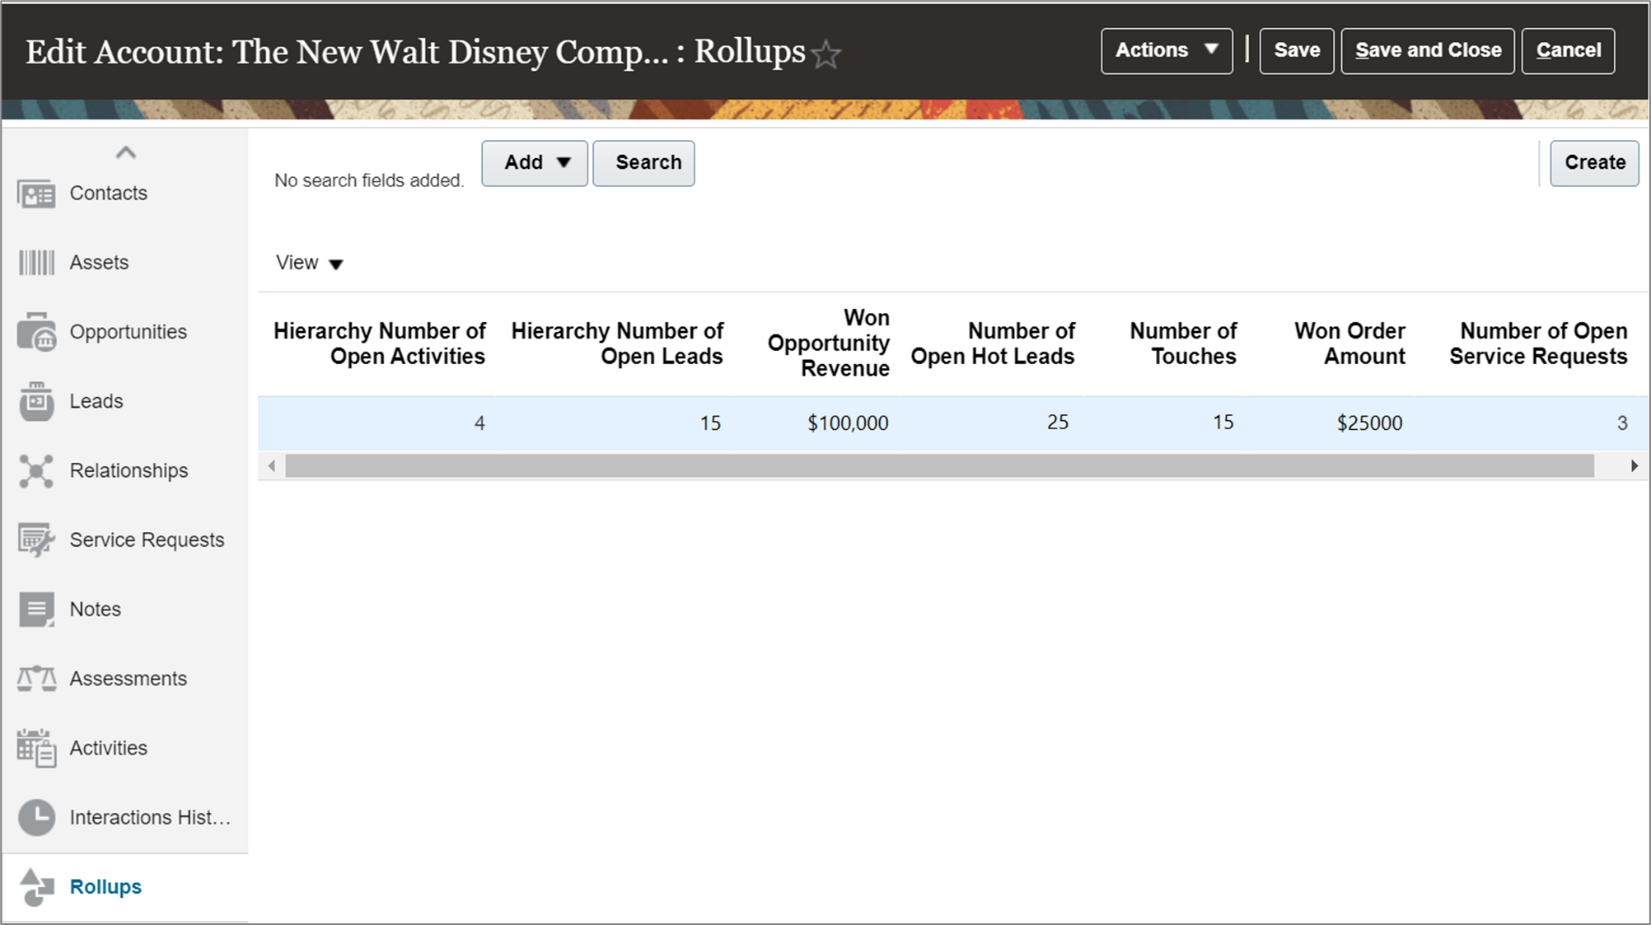 The screen shot shows the Rollups subtab for the Account object. The Rollups subtab shows the account rollups.